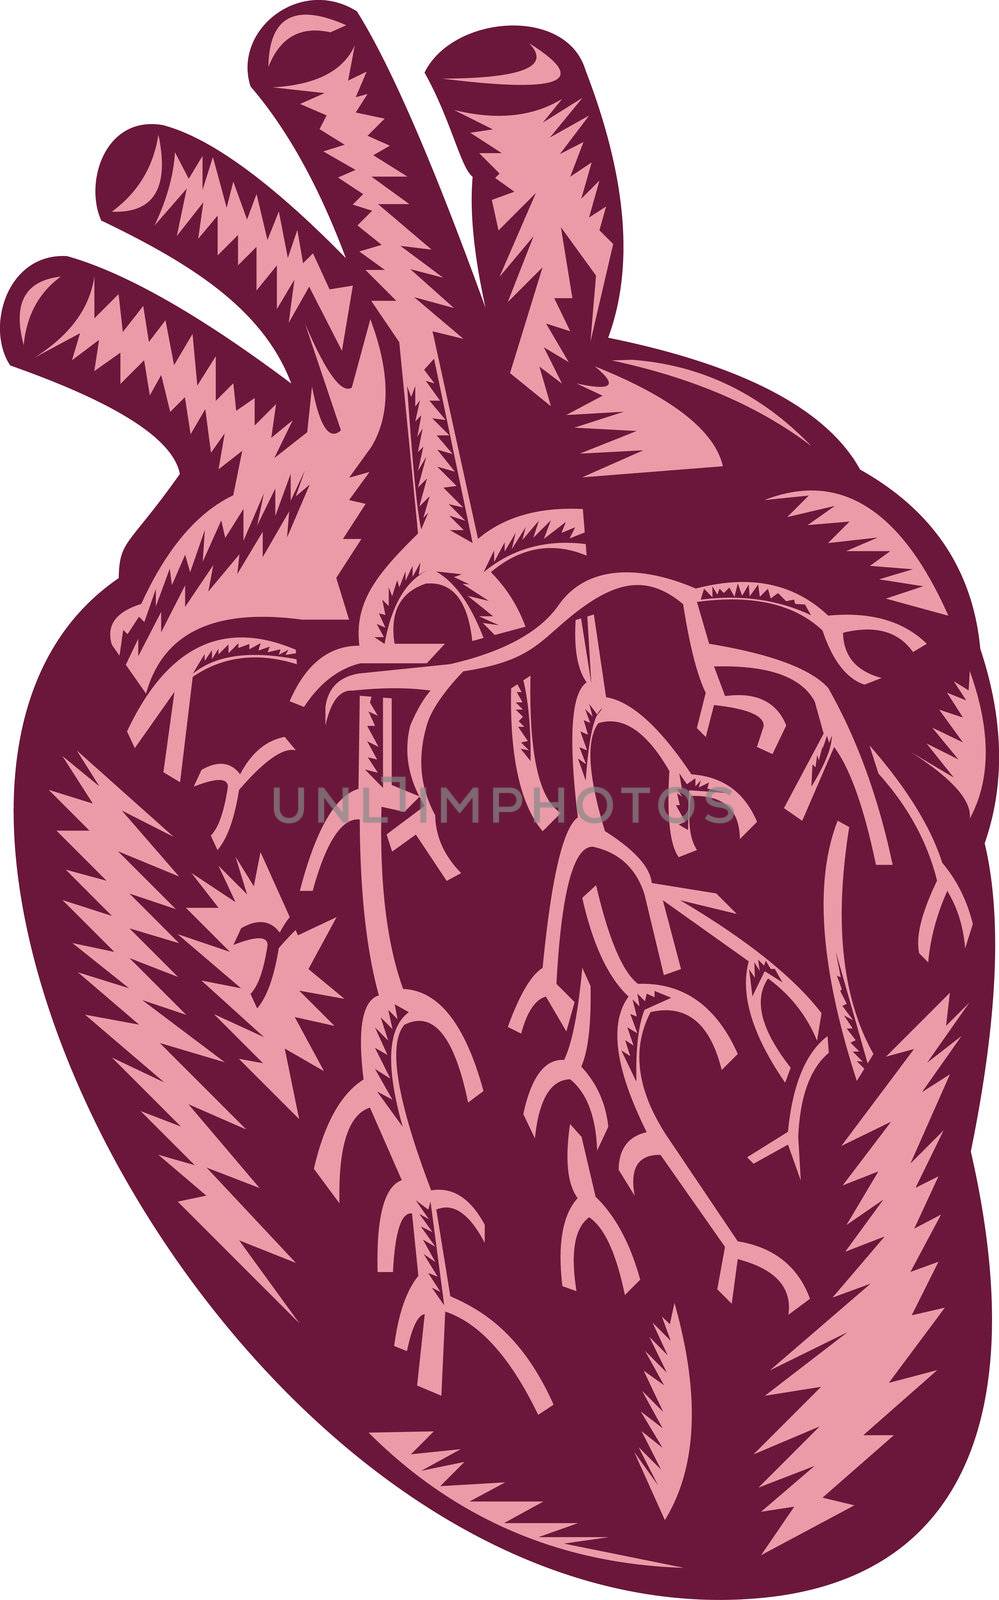 illustration of the human heart done in woodcut style.